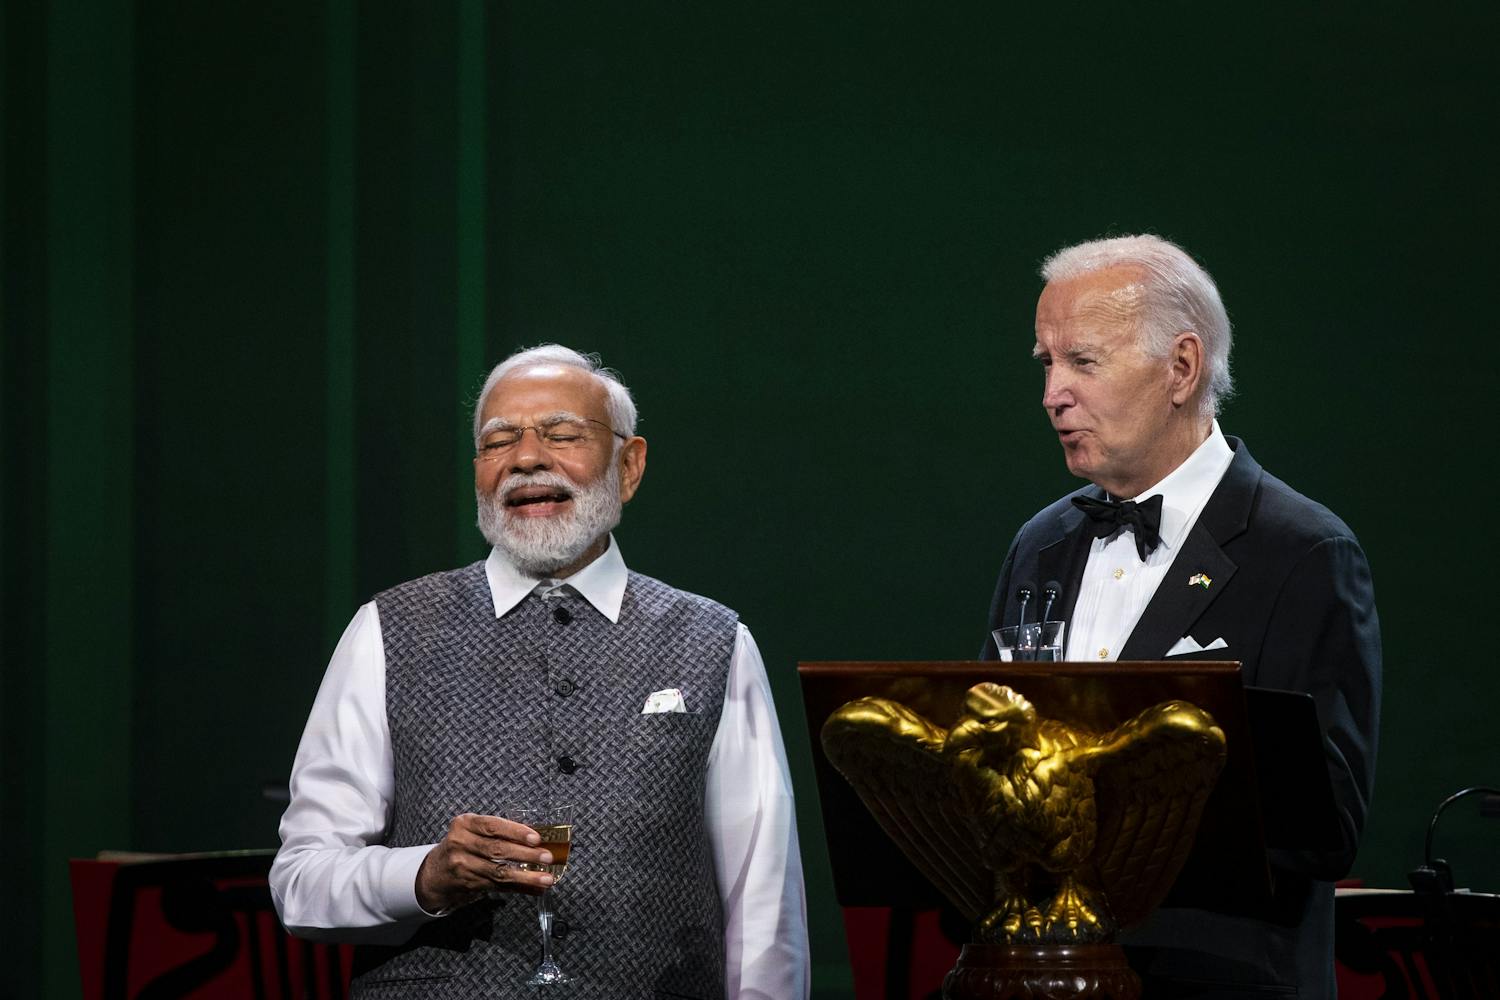 Biden hopes to disassociate India from its rapprochement with Russia